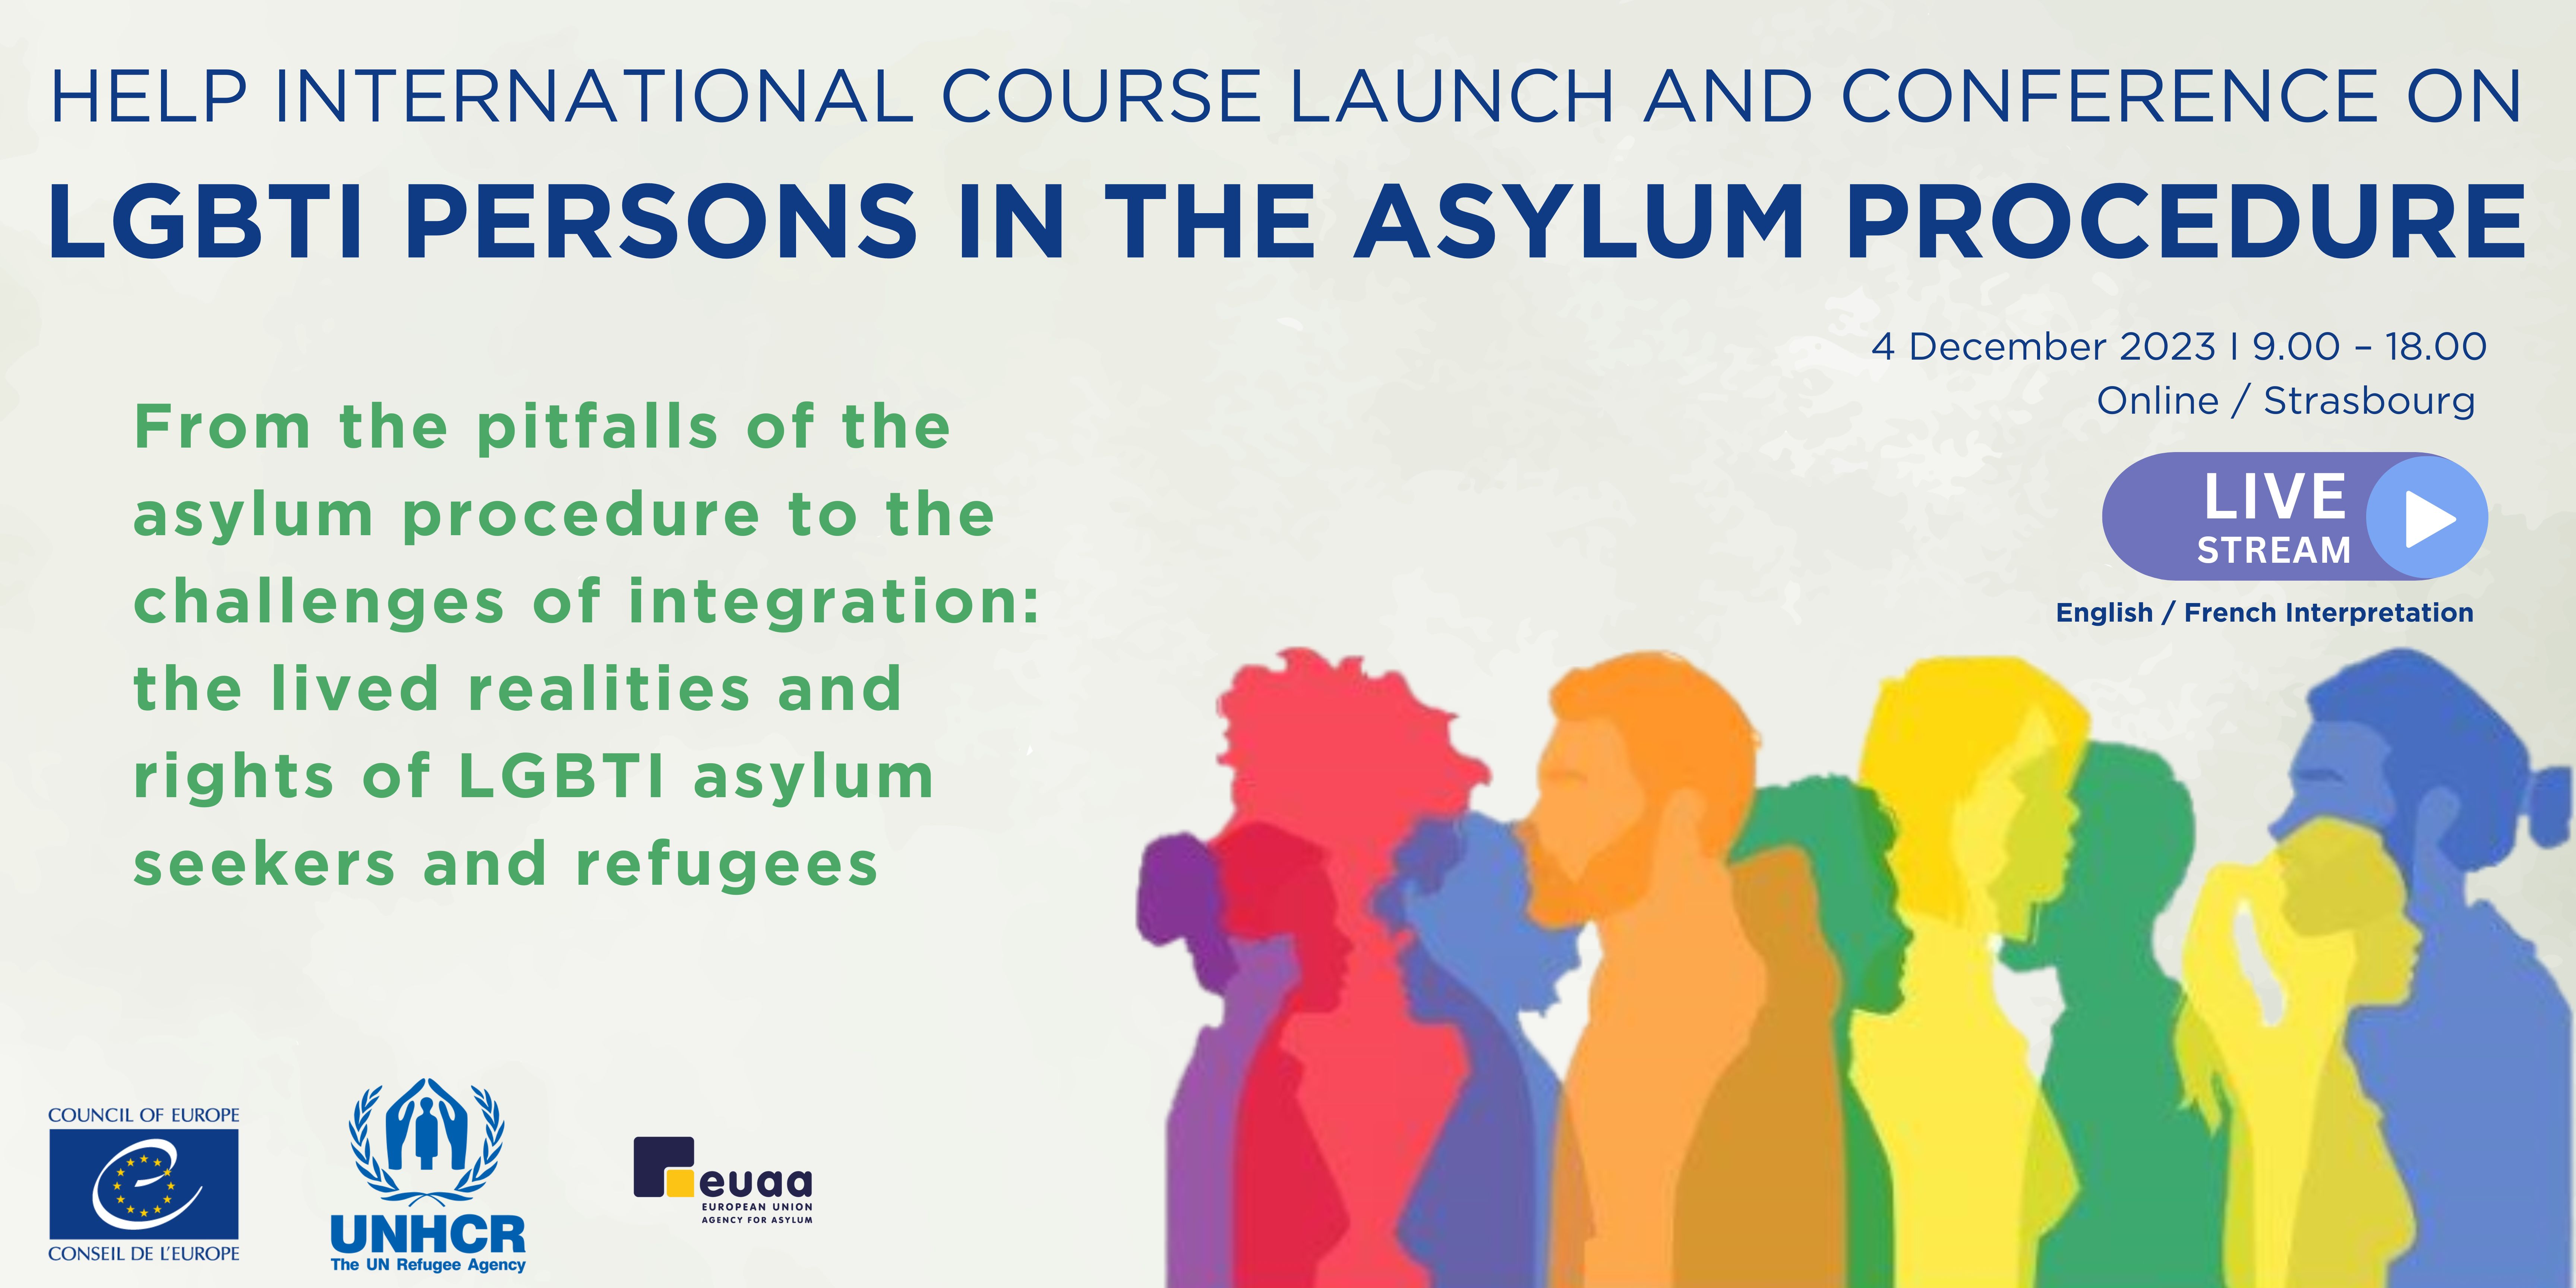 HELP international course launch and conference on LGBTI persons in the asylum procedure, 4 December 2023